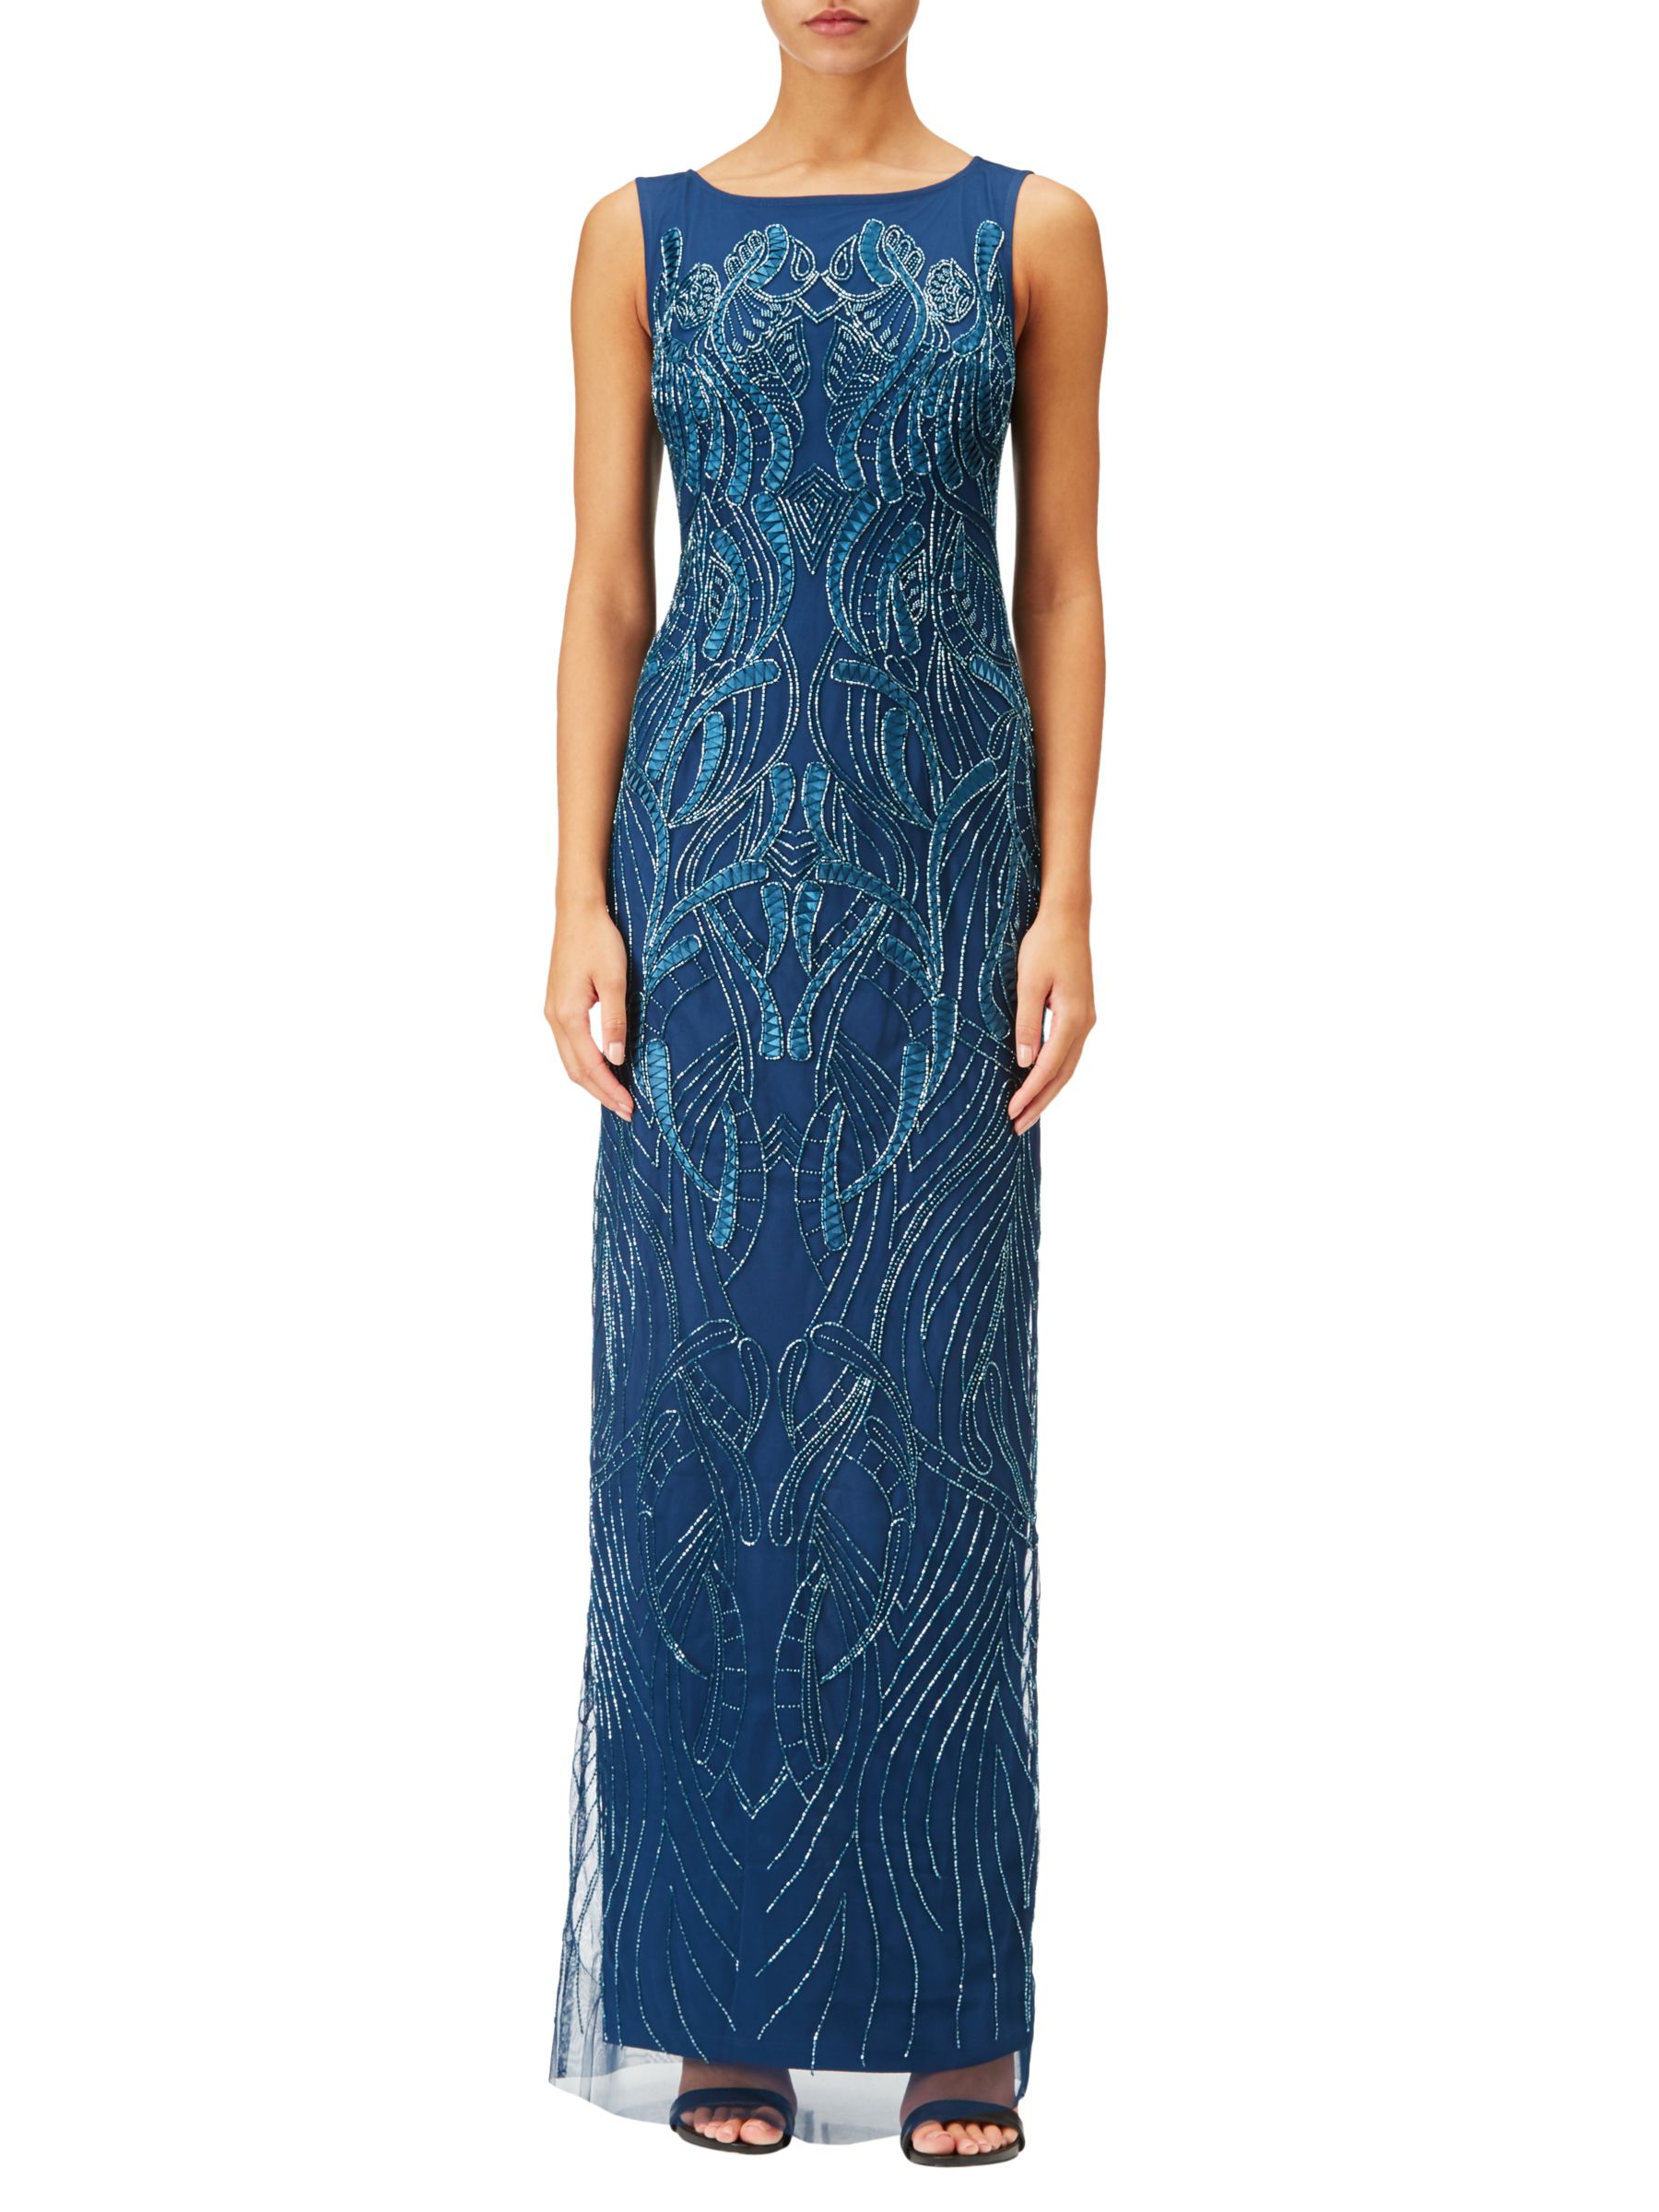 Adrianna Papell Beaded Boat Neck Long Evening Dress, Blue at John Lewis ...